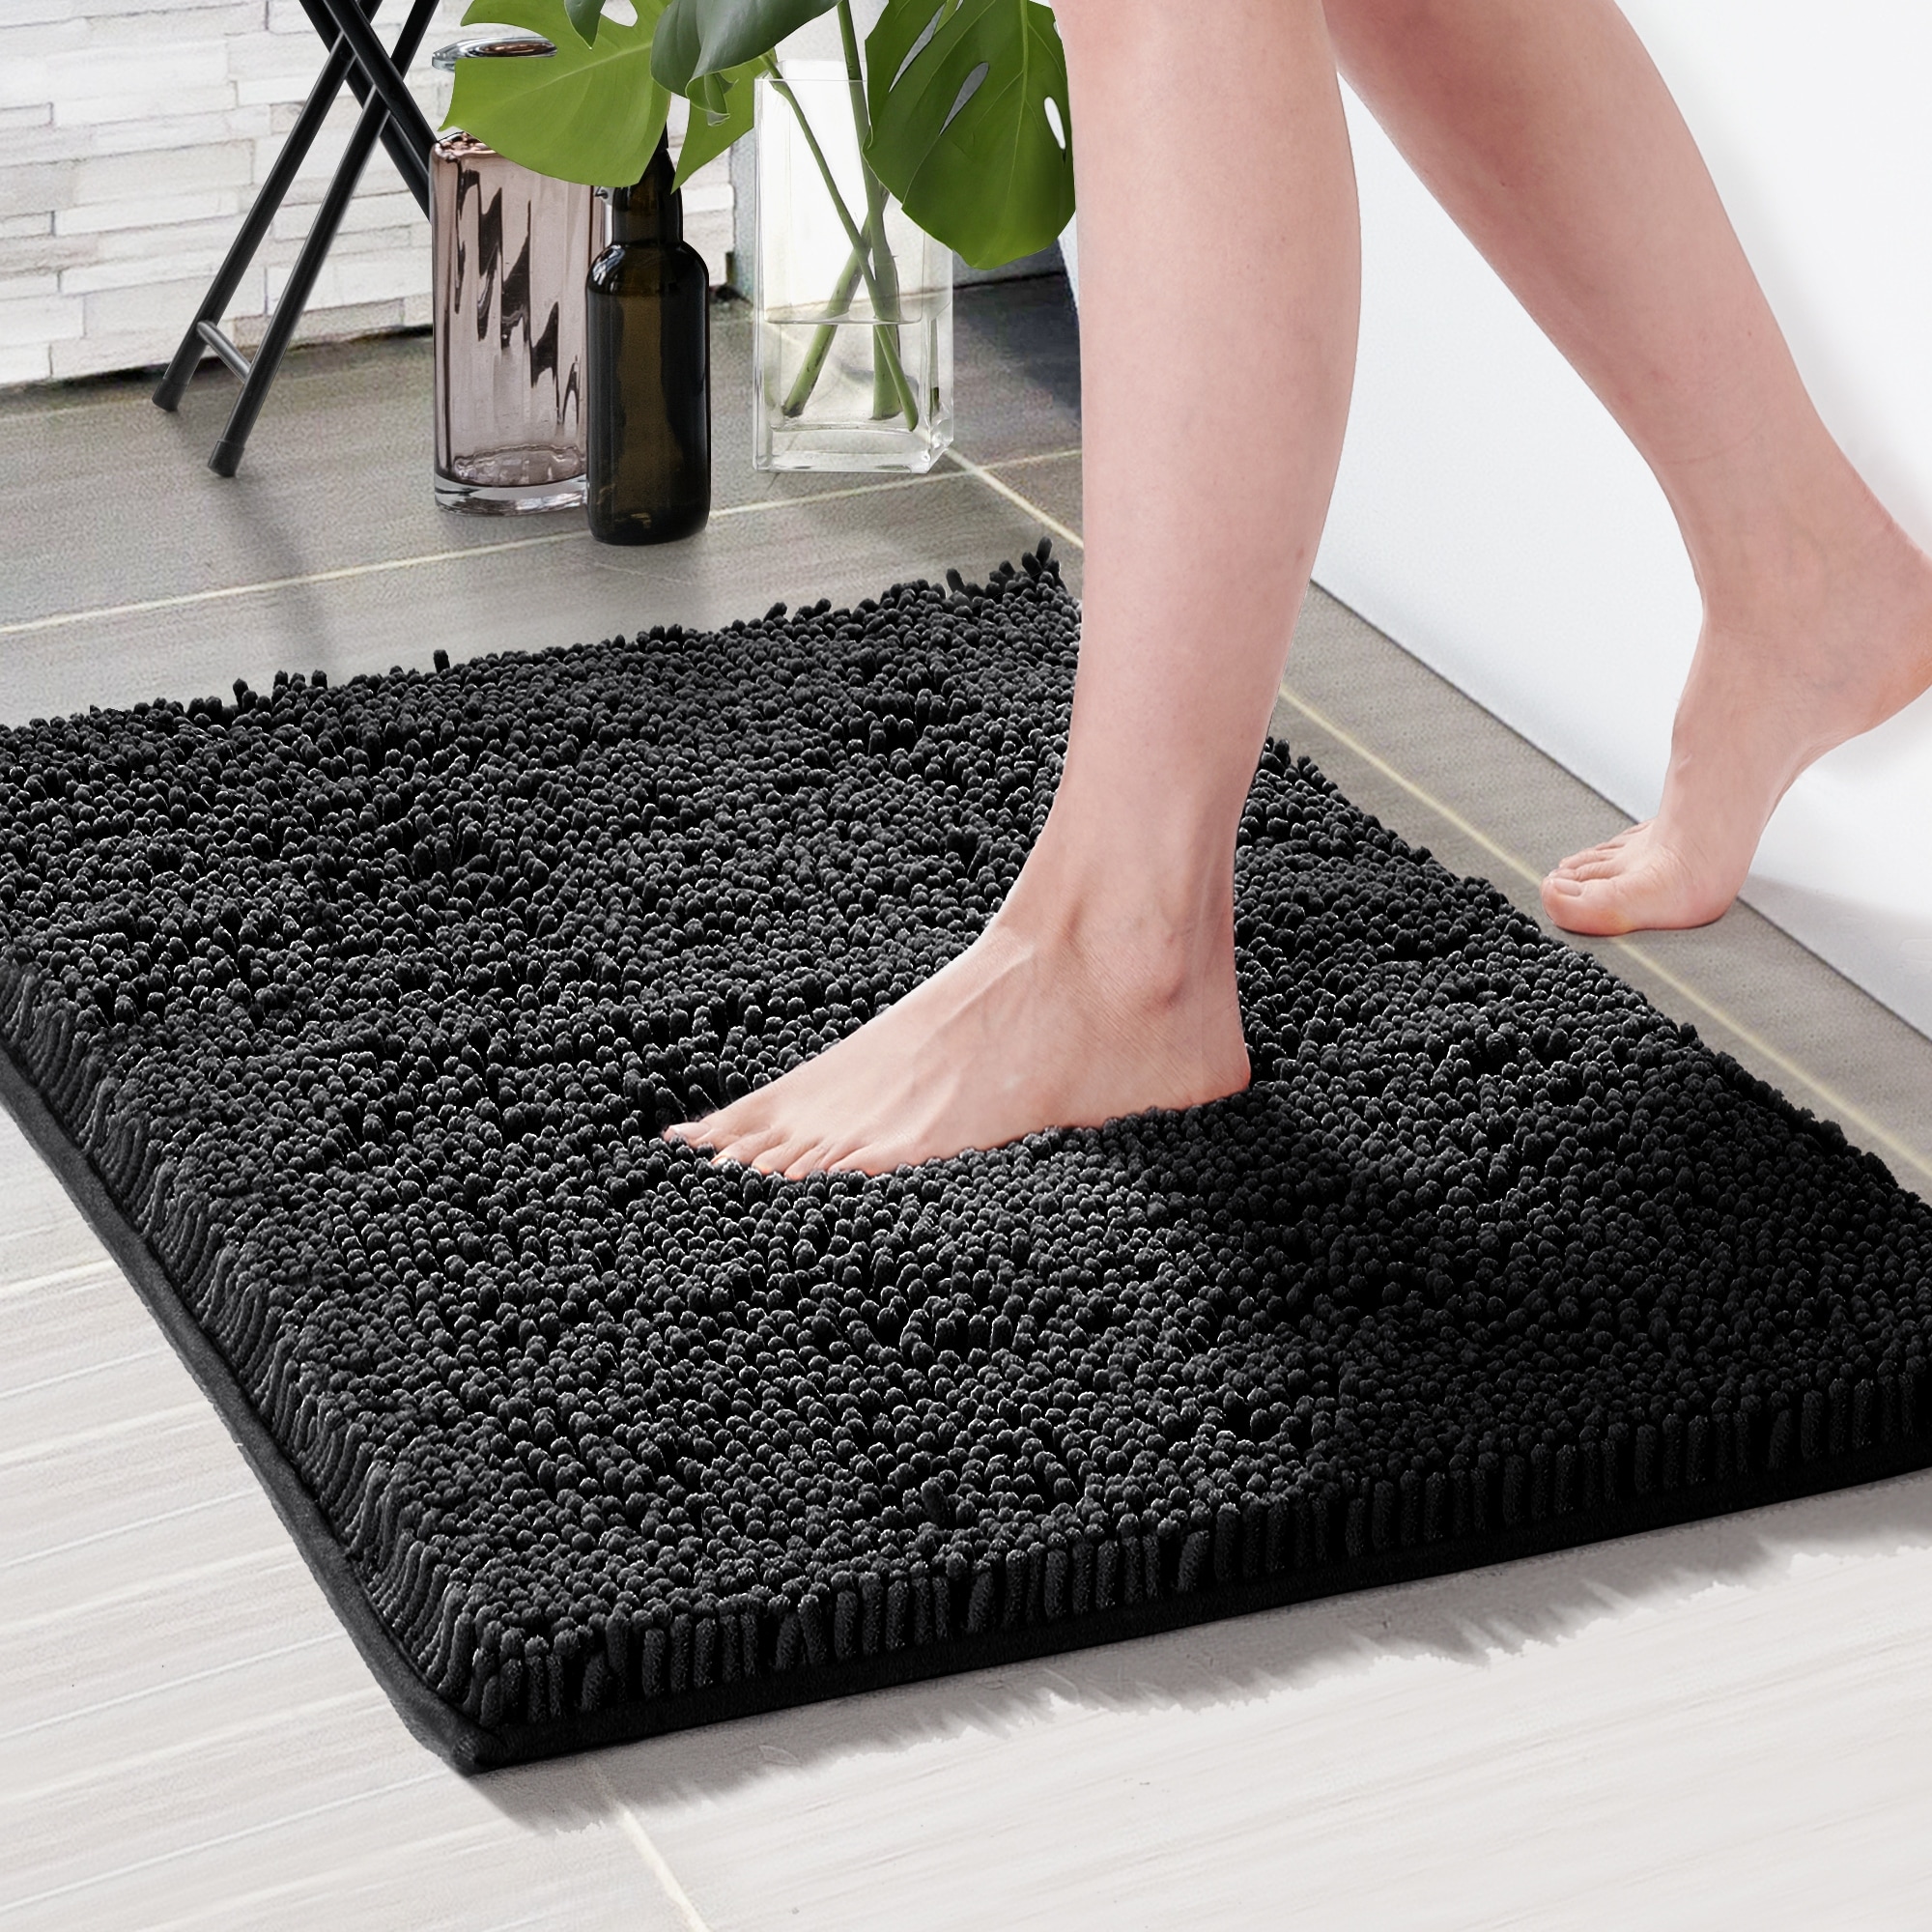 https://ak1.ostkcdn.com/images/products/is/images/direct/e024b9c8c6d5af4ff9ae887e956cac7191fe5070/Deconovo-Plush-Absorbent-Thick-Chenille-Bath-Rugs-%281-PC%29.jpg